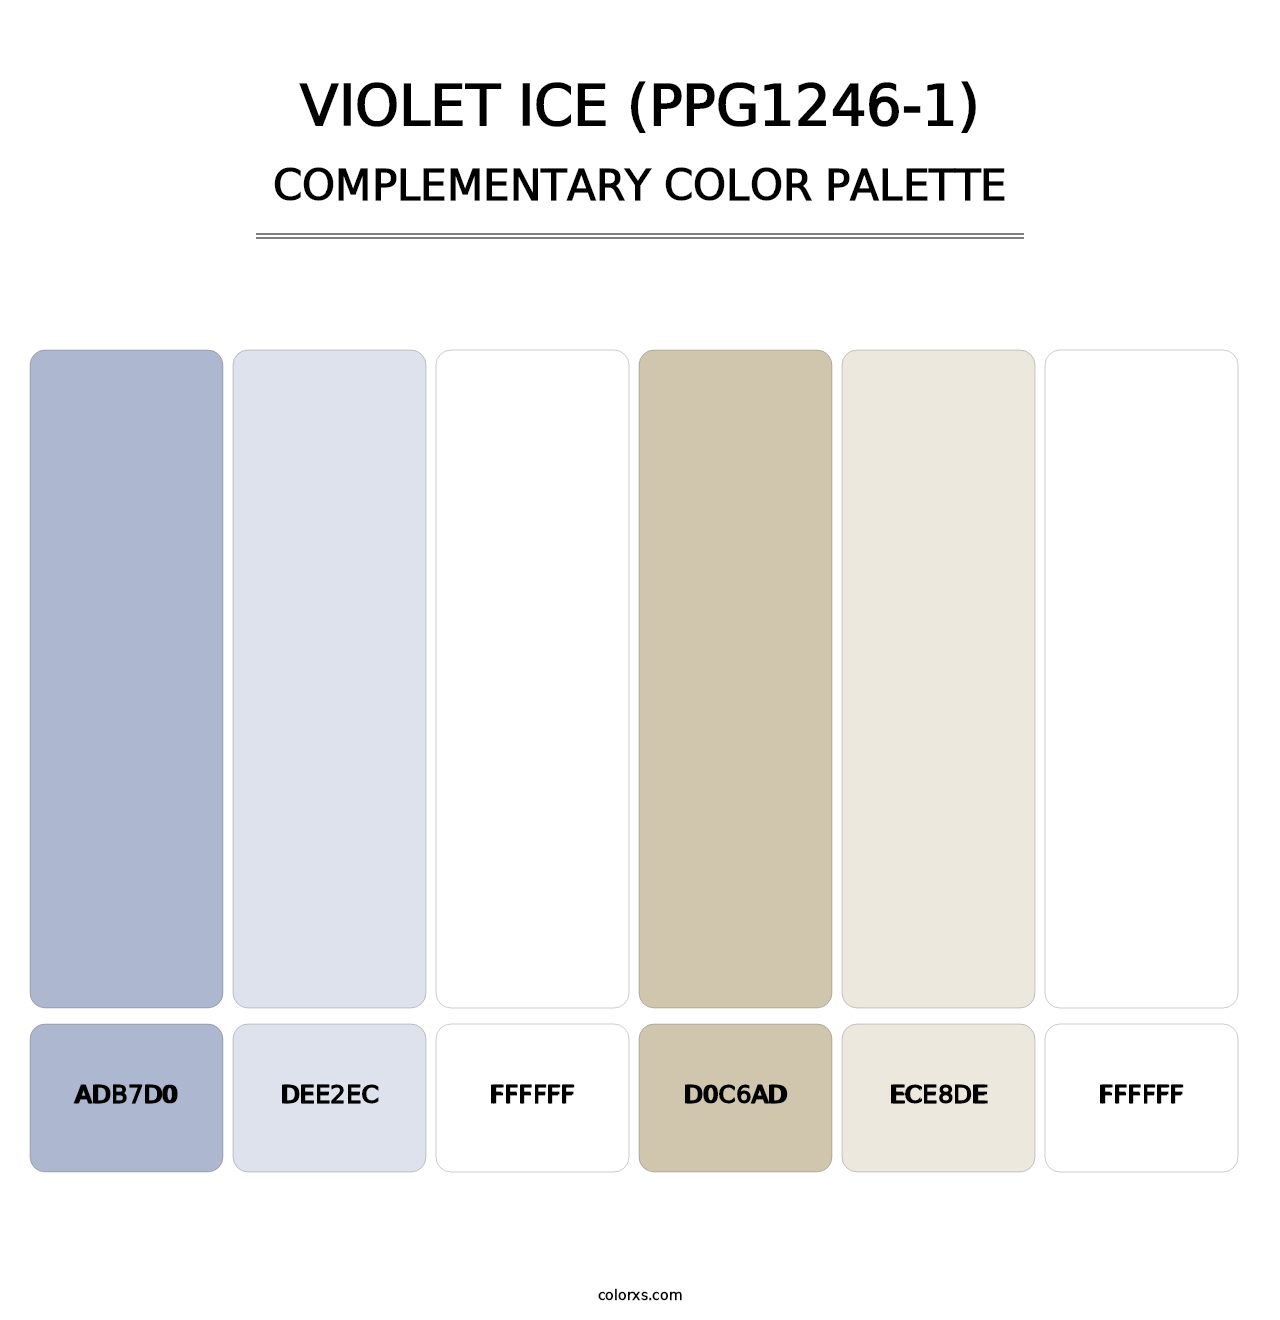 Violet Ice (PPG1246-1) - Complementary Color Palette